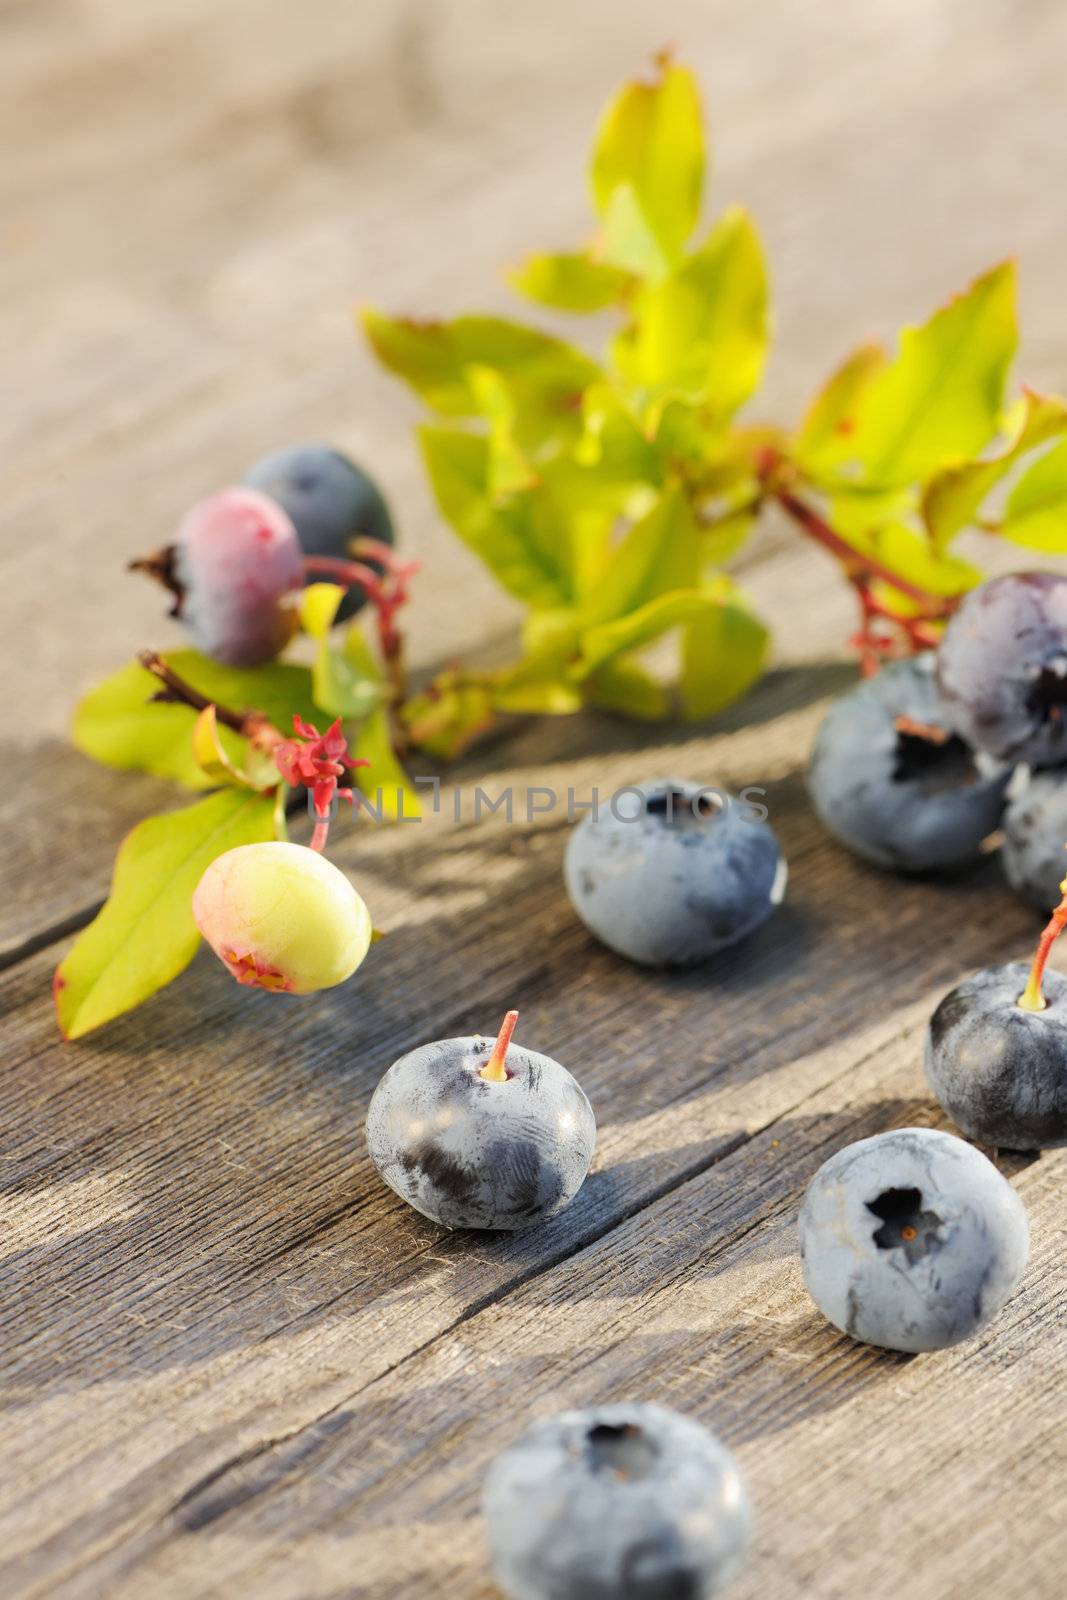 Blueberry on wooden table by haveseen